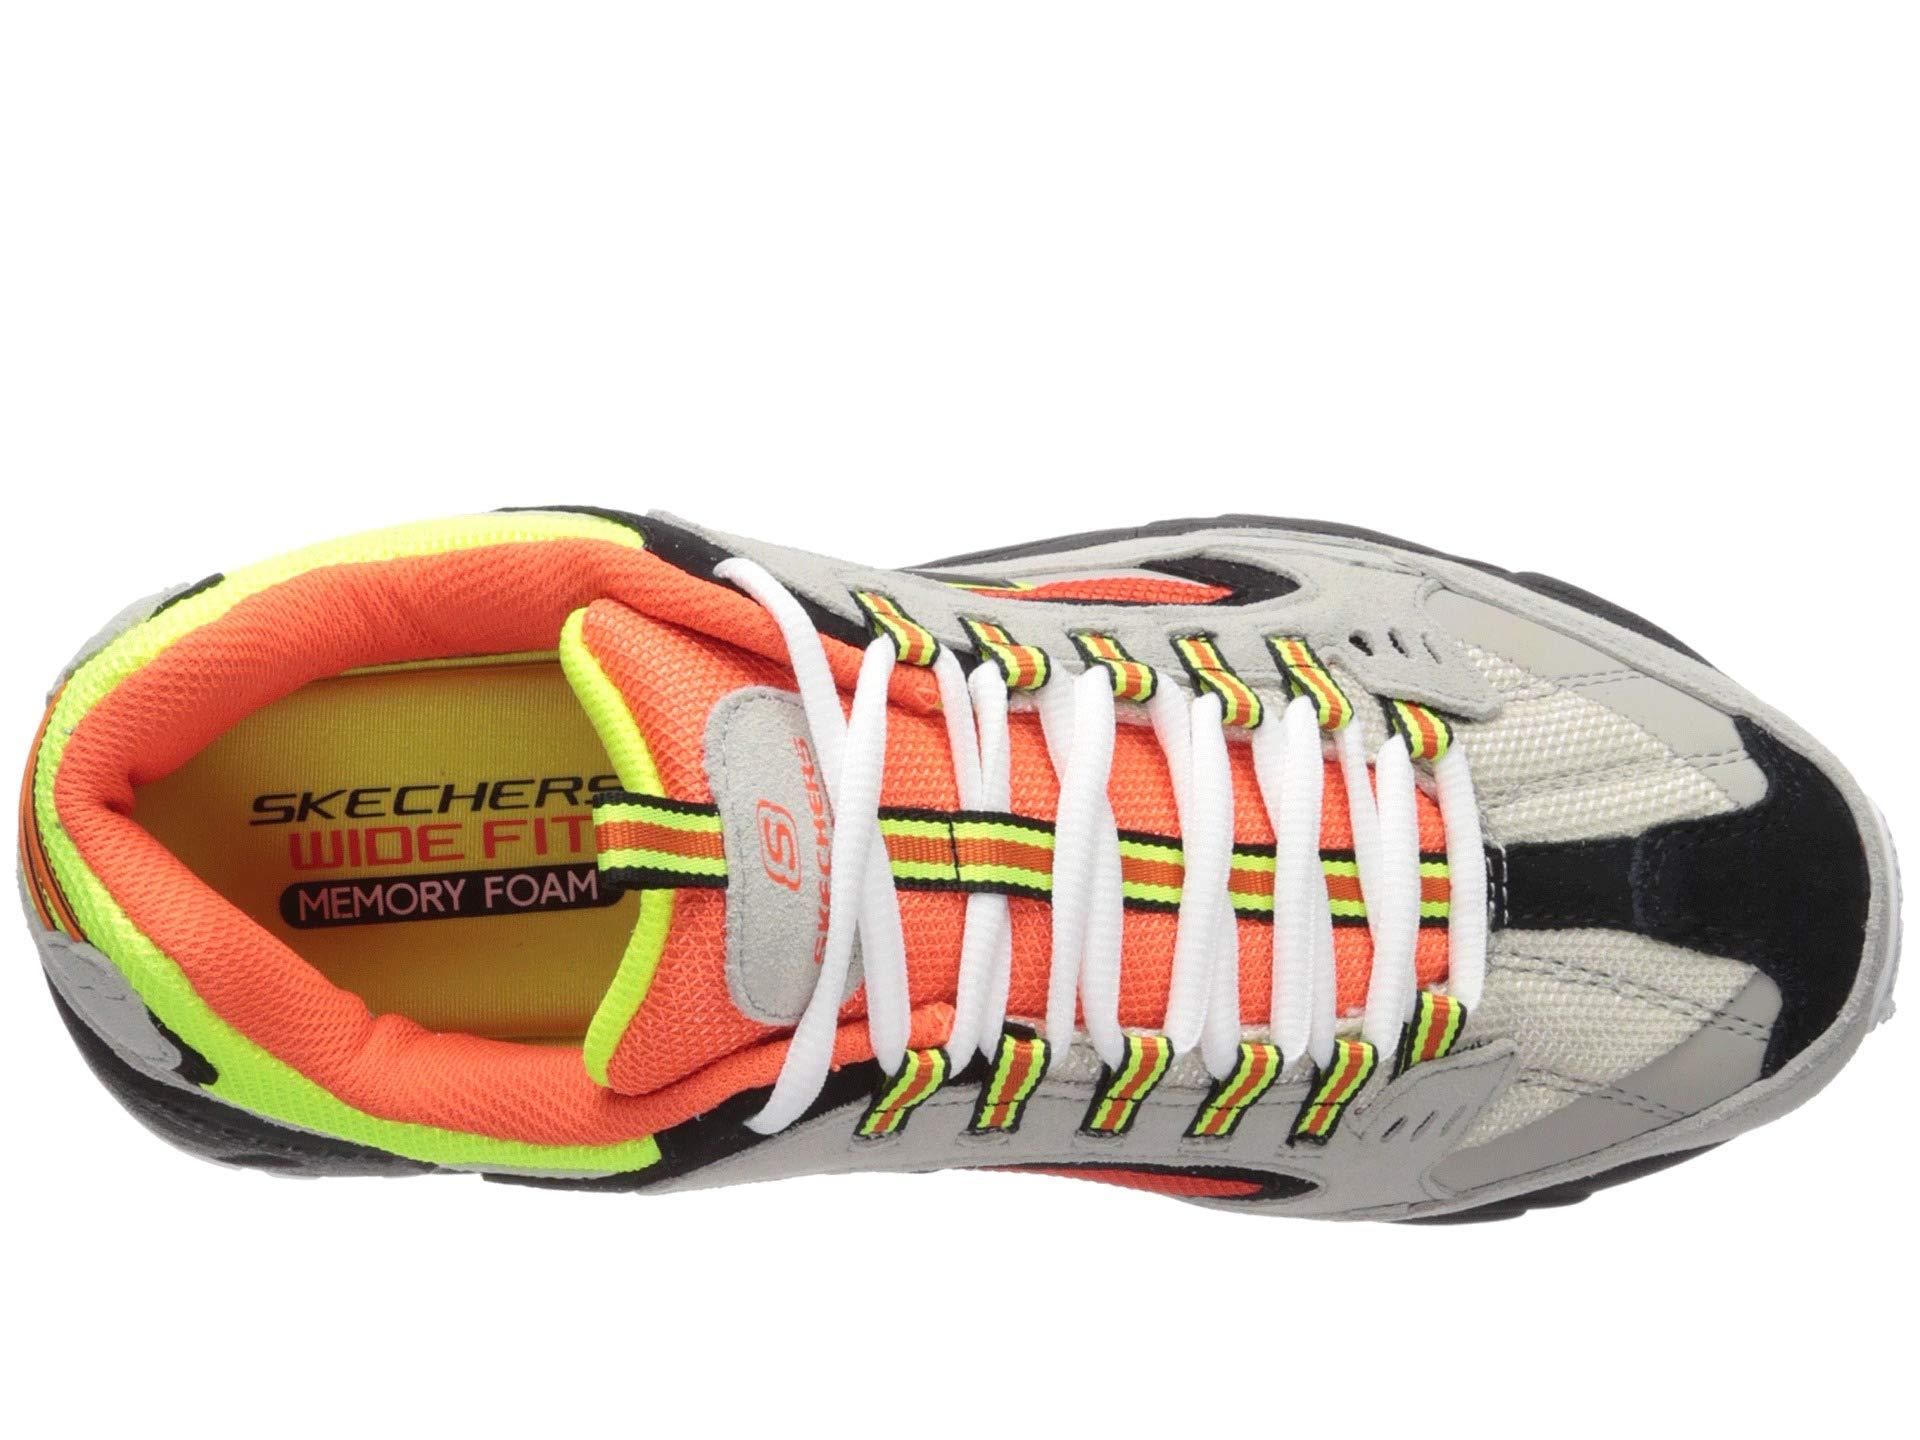 Skechers Leather Stamina Cutback Trainers in Grey/Orange/Yellow (Gray) for  Men - Lyst